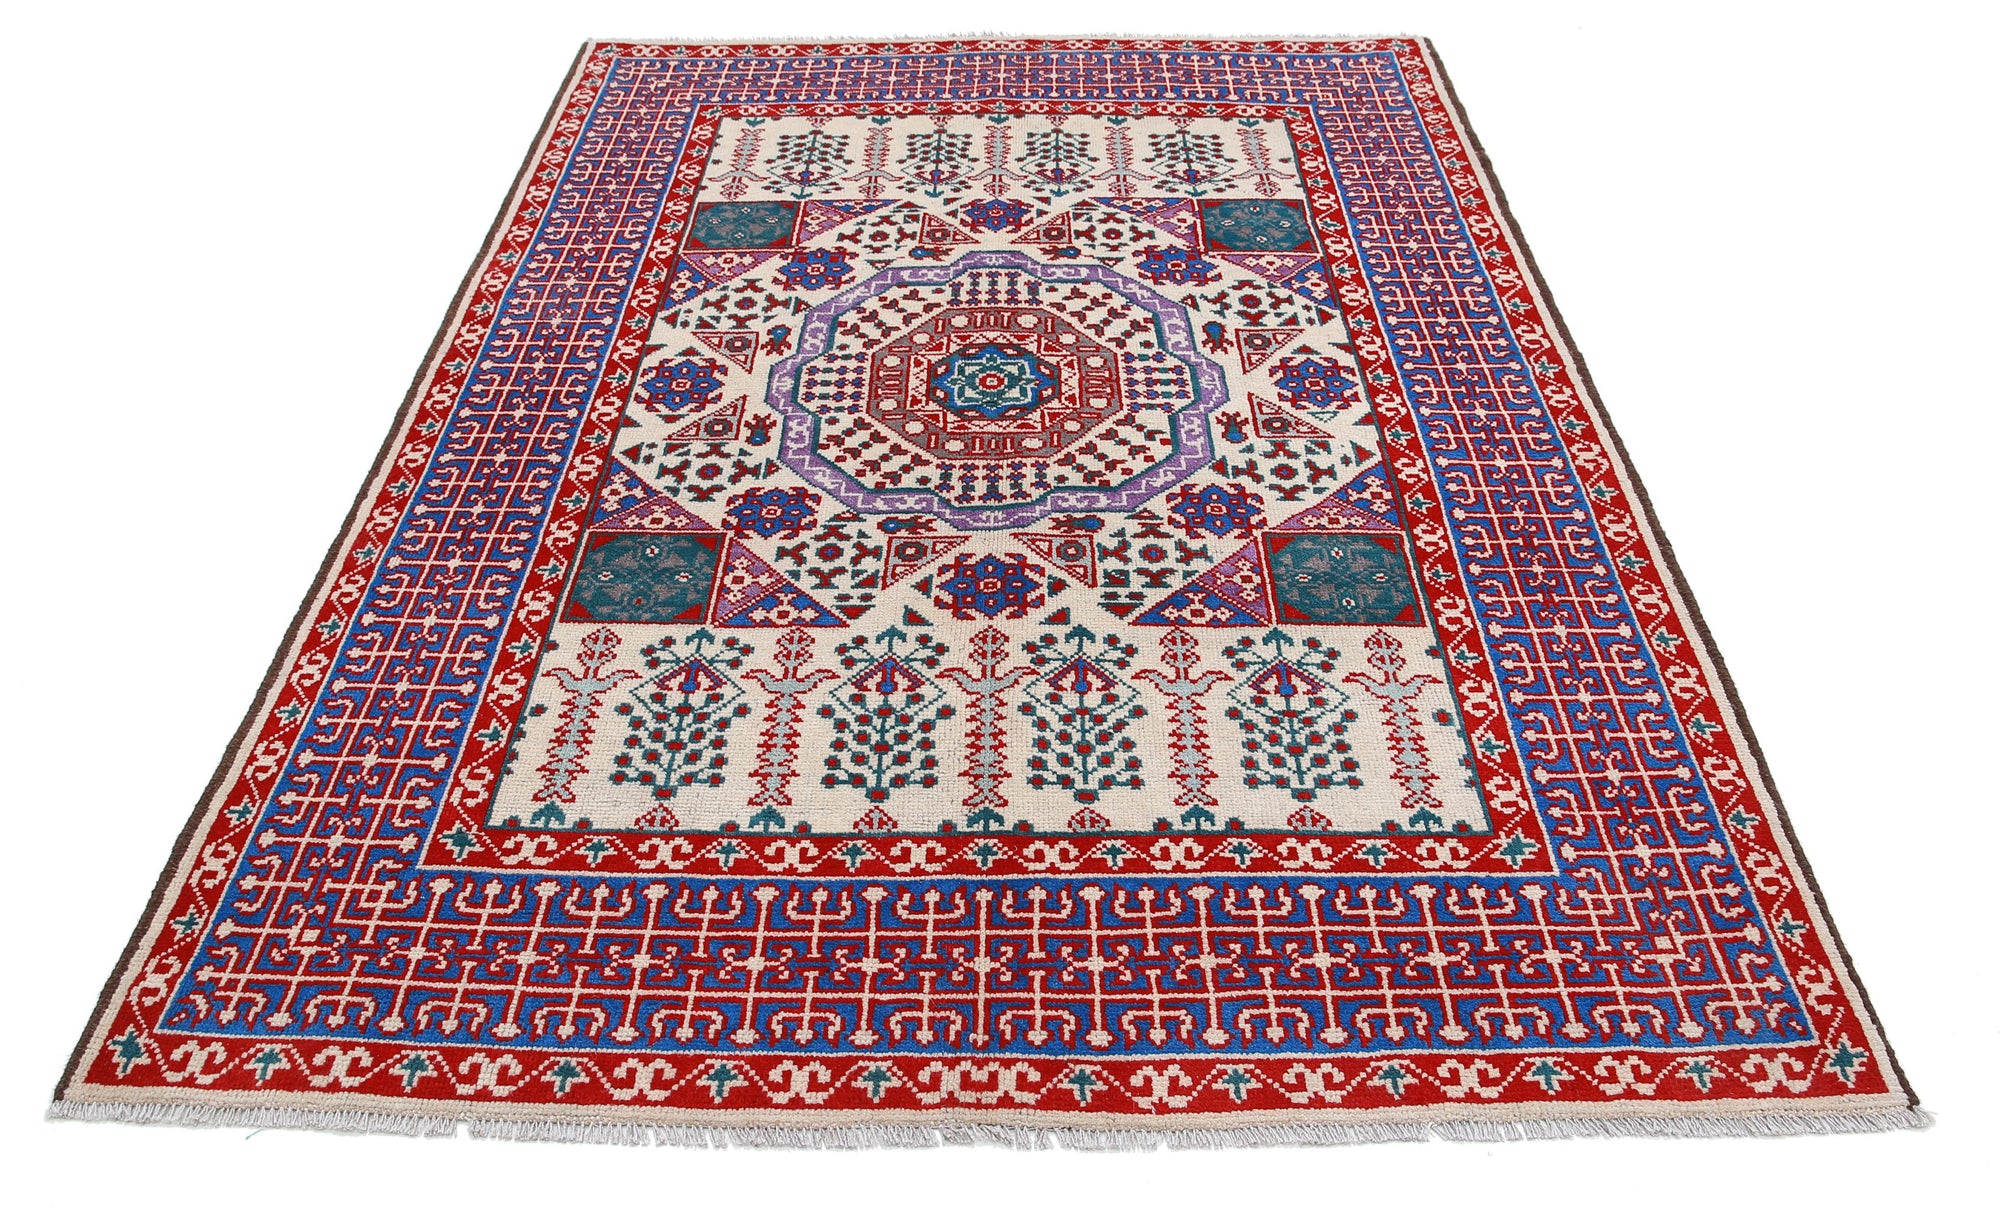 Revival-hand-knotted-qarghani-wool-rug-5014226-3.jpg